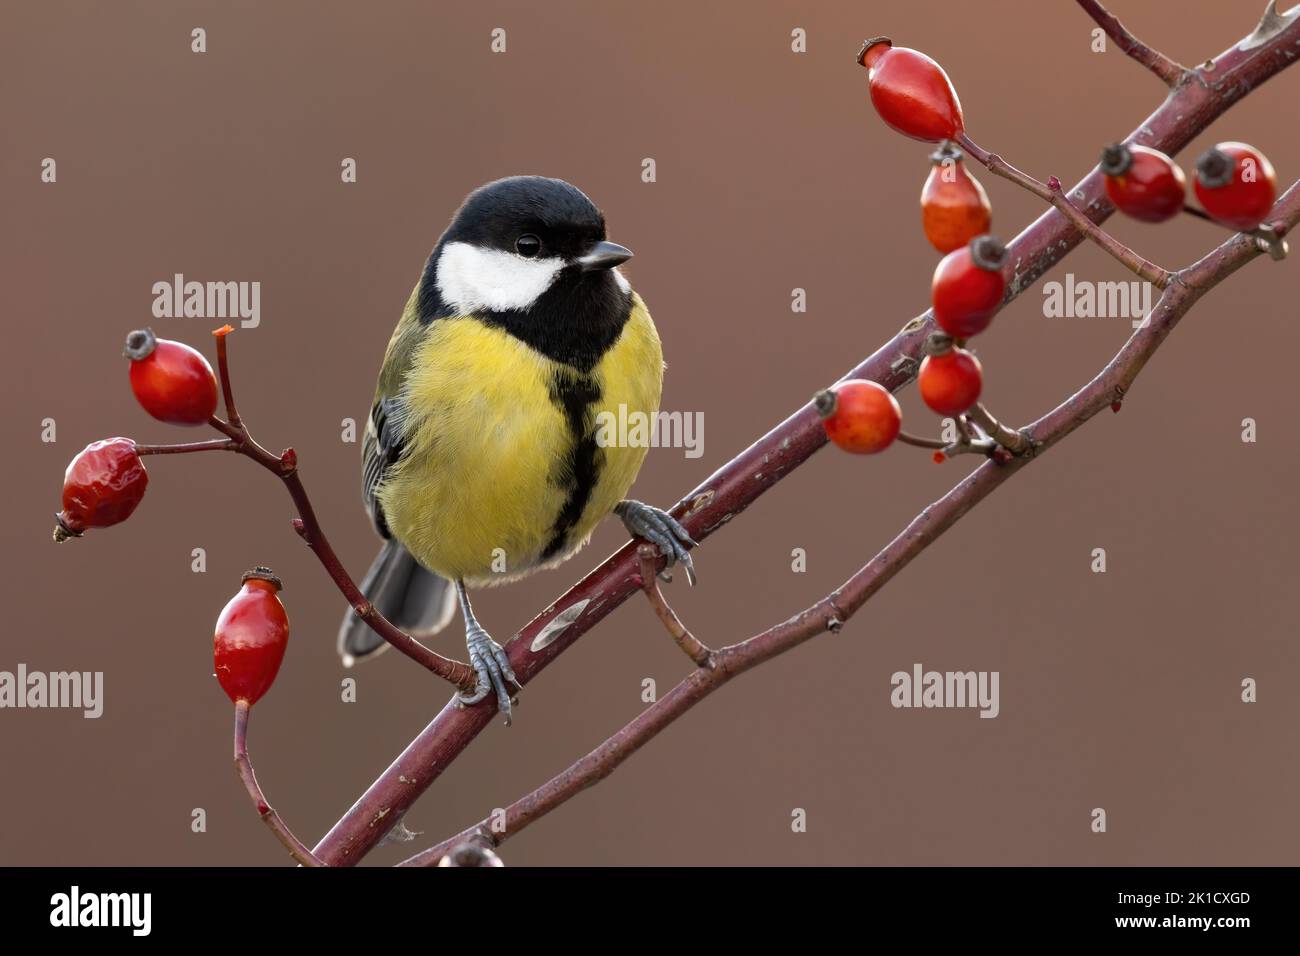 Great tit sitting on a rosehip twig in autumn nature Stock Photo